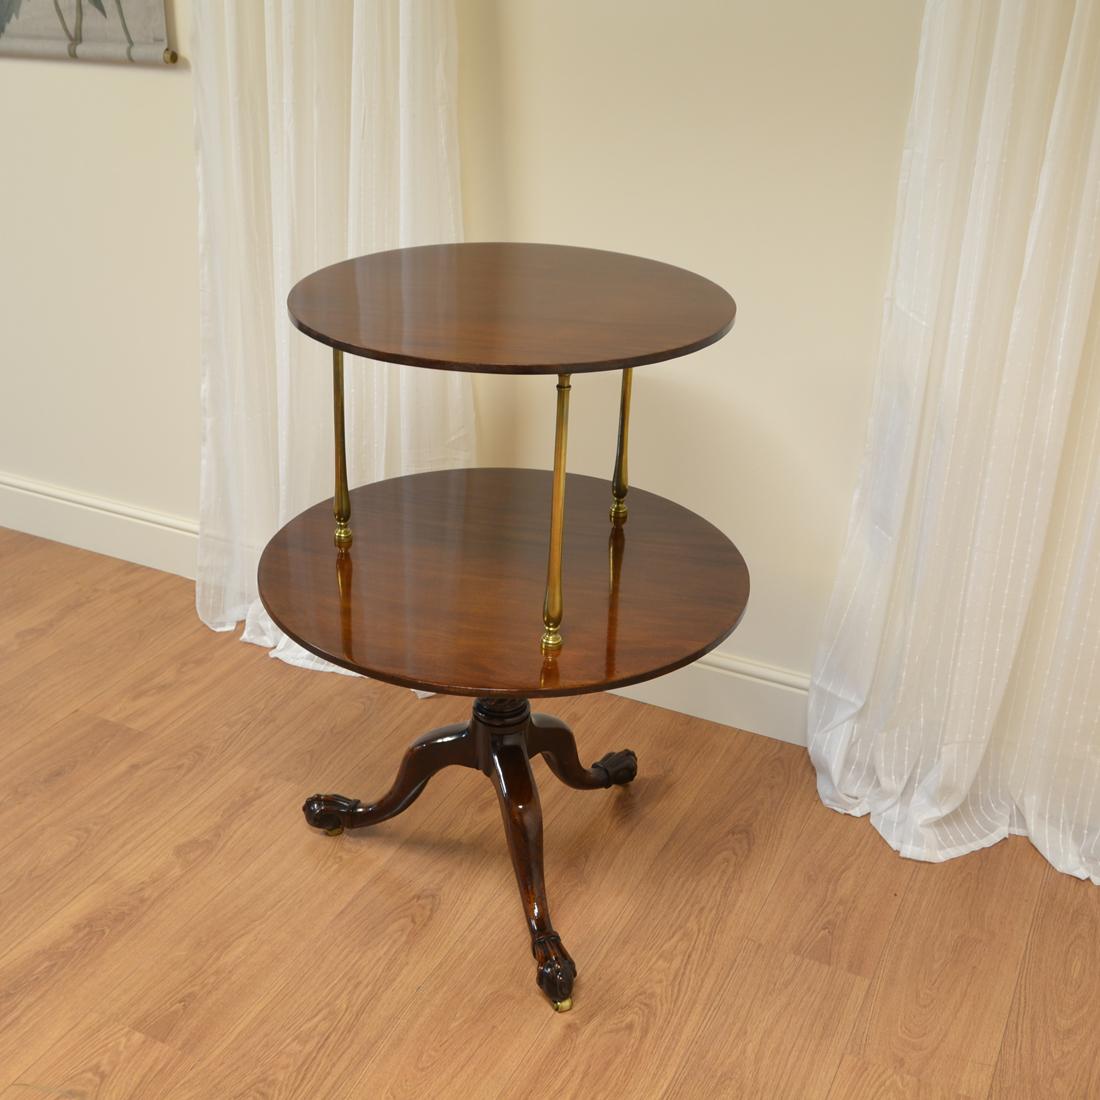 Spectacular quality Georgian mahogany antique two-tier occasional table

Of Gillows quality and dating from circa 1800, in The Georgian period this spectacular quality mahogany antique two-tier occasional table or dumb waiter would make the ideal